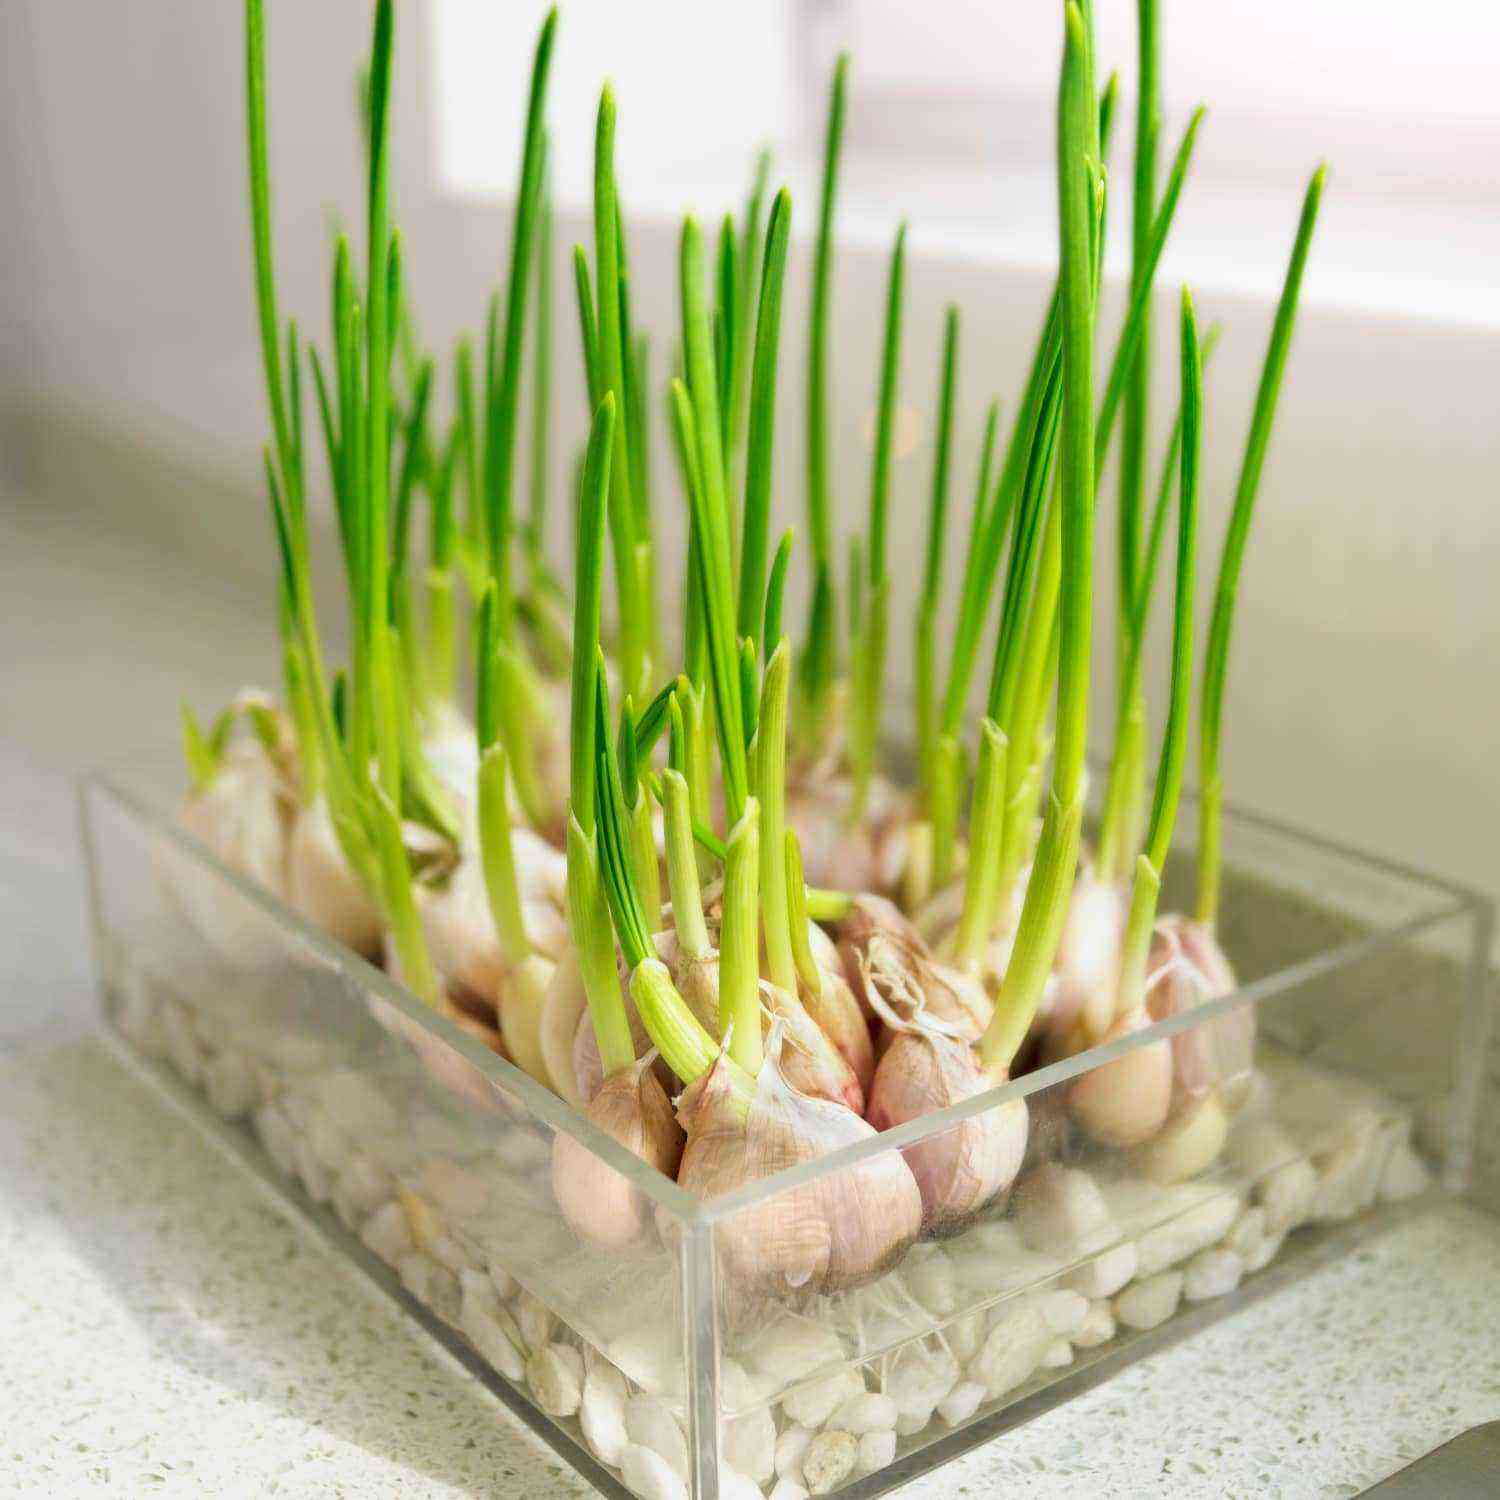 When and how to harvest garlic?